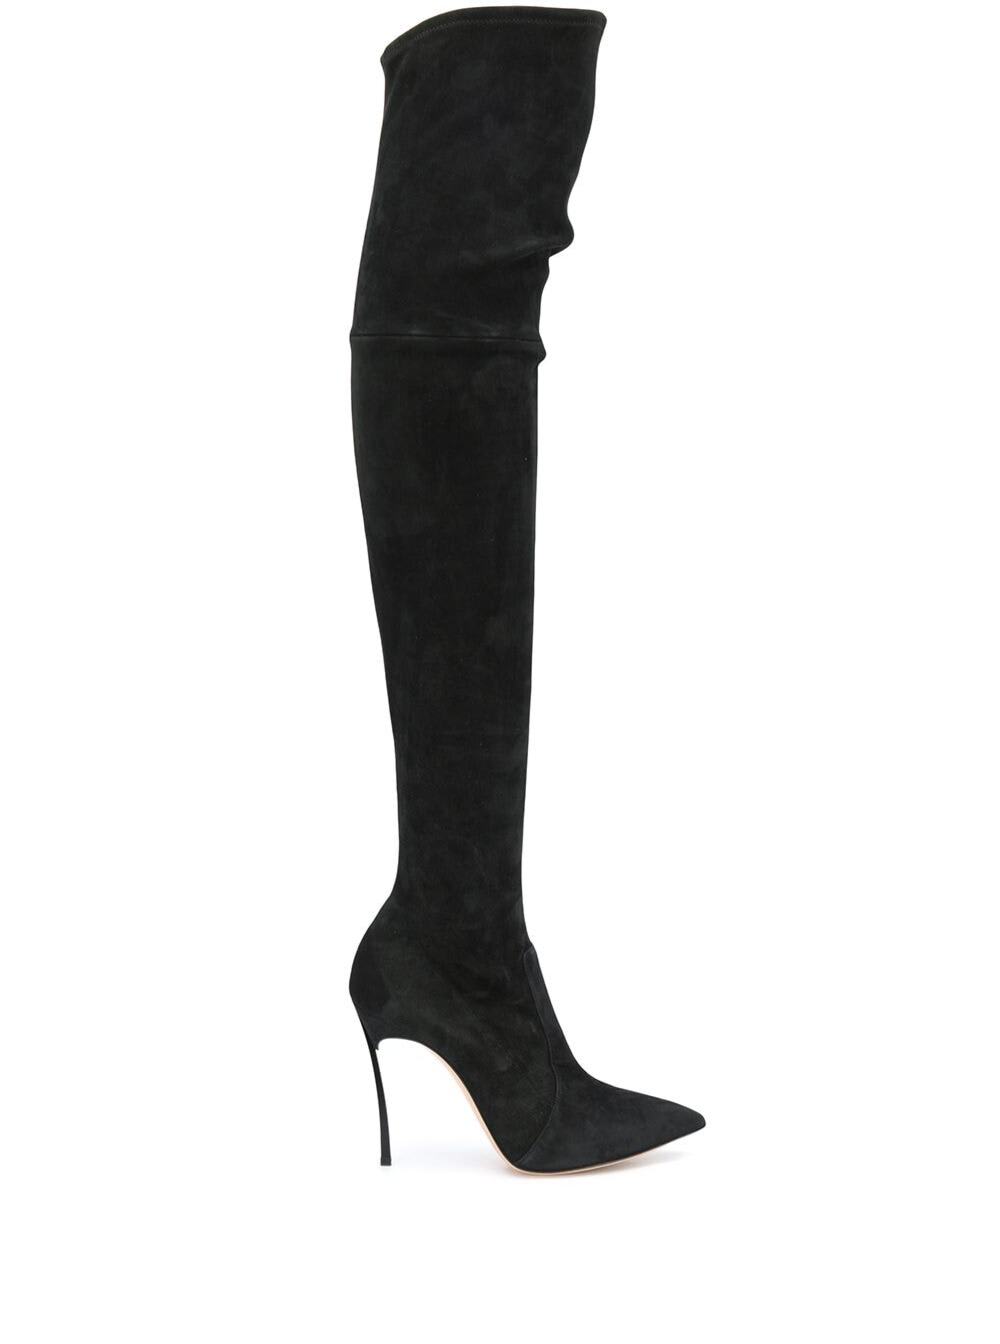 Cuissardes Black Suede Boots With Blade Heel Casadei Woman